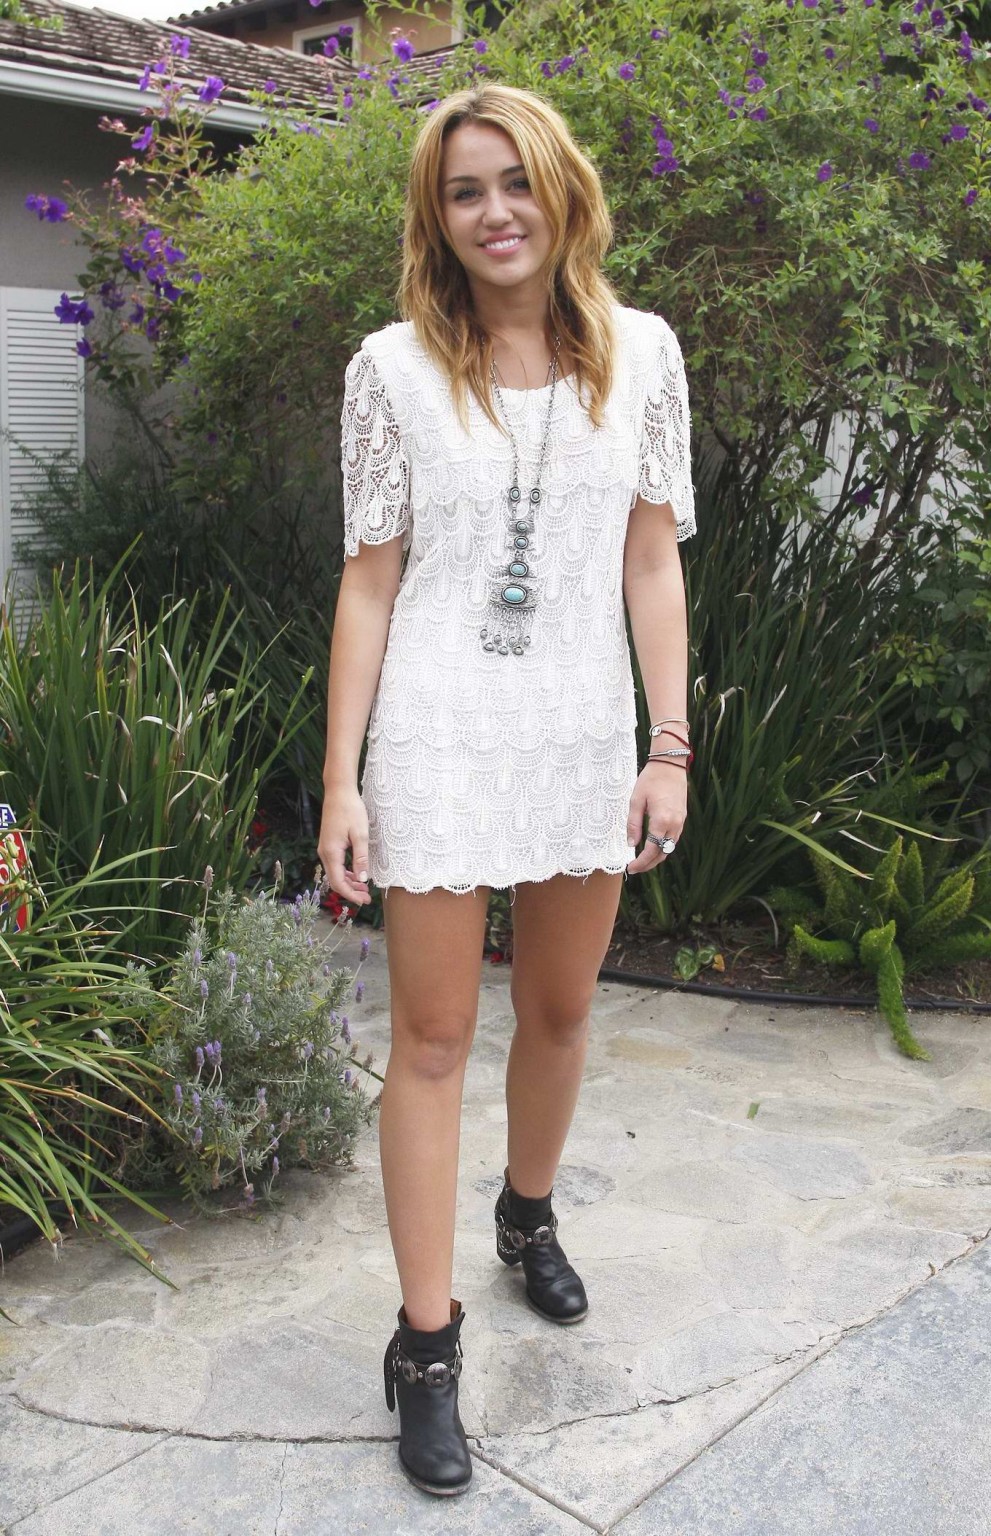 Miley Cyrus leggy wearing white mini dress at the house party #75289935